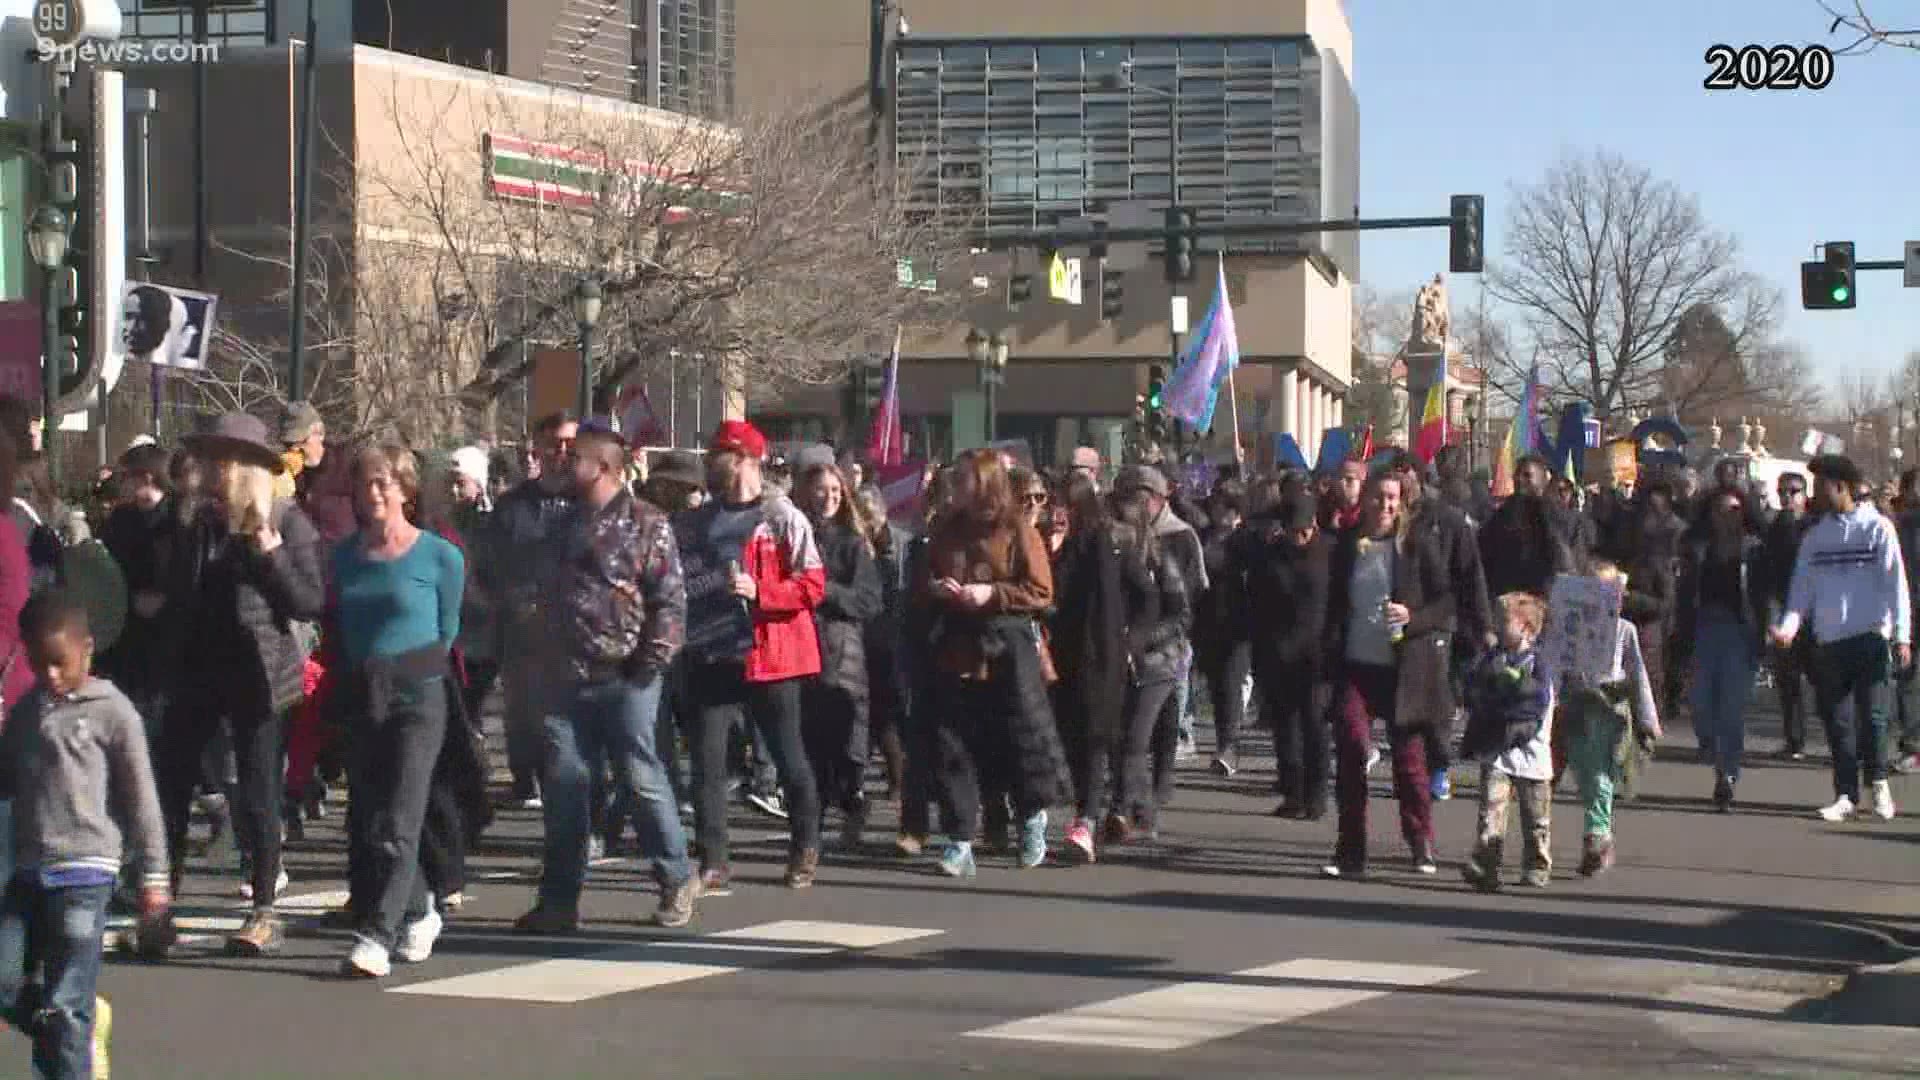 The theme for this year's Denver march and parade for Martin Luther King Jr. Day is "Good Trouble."